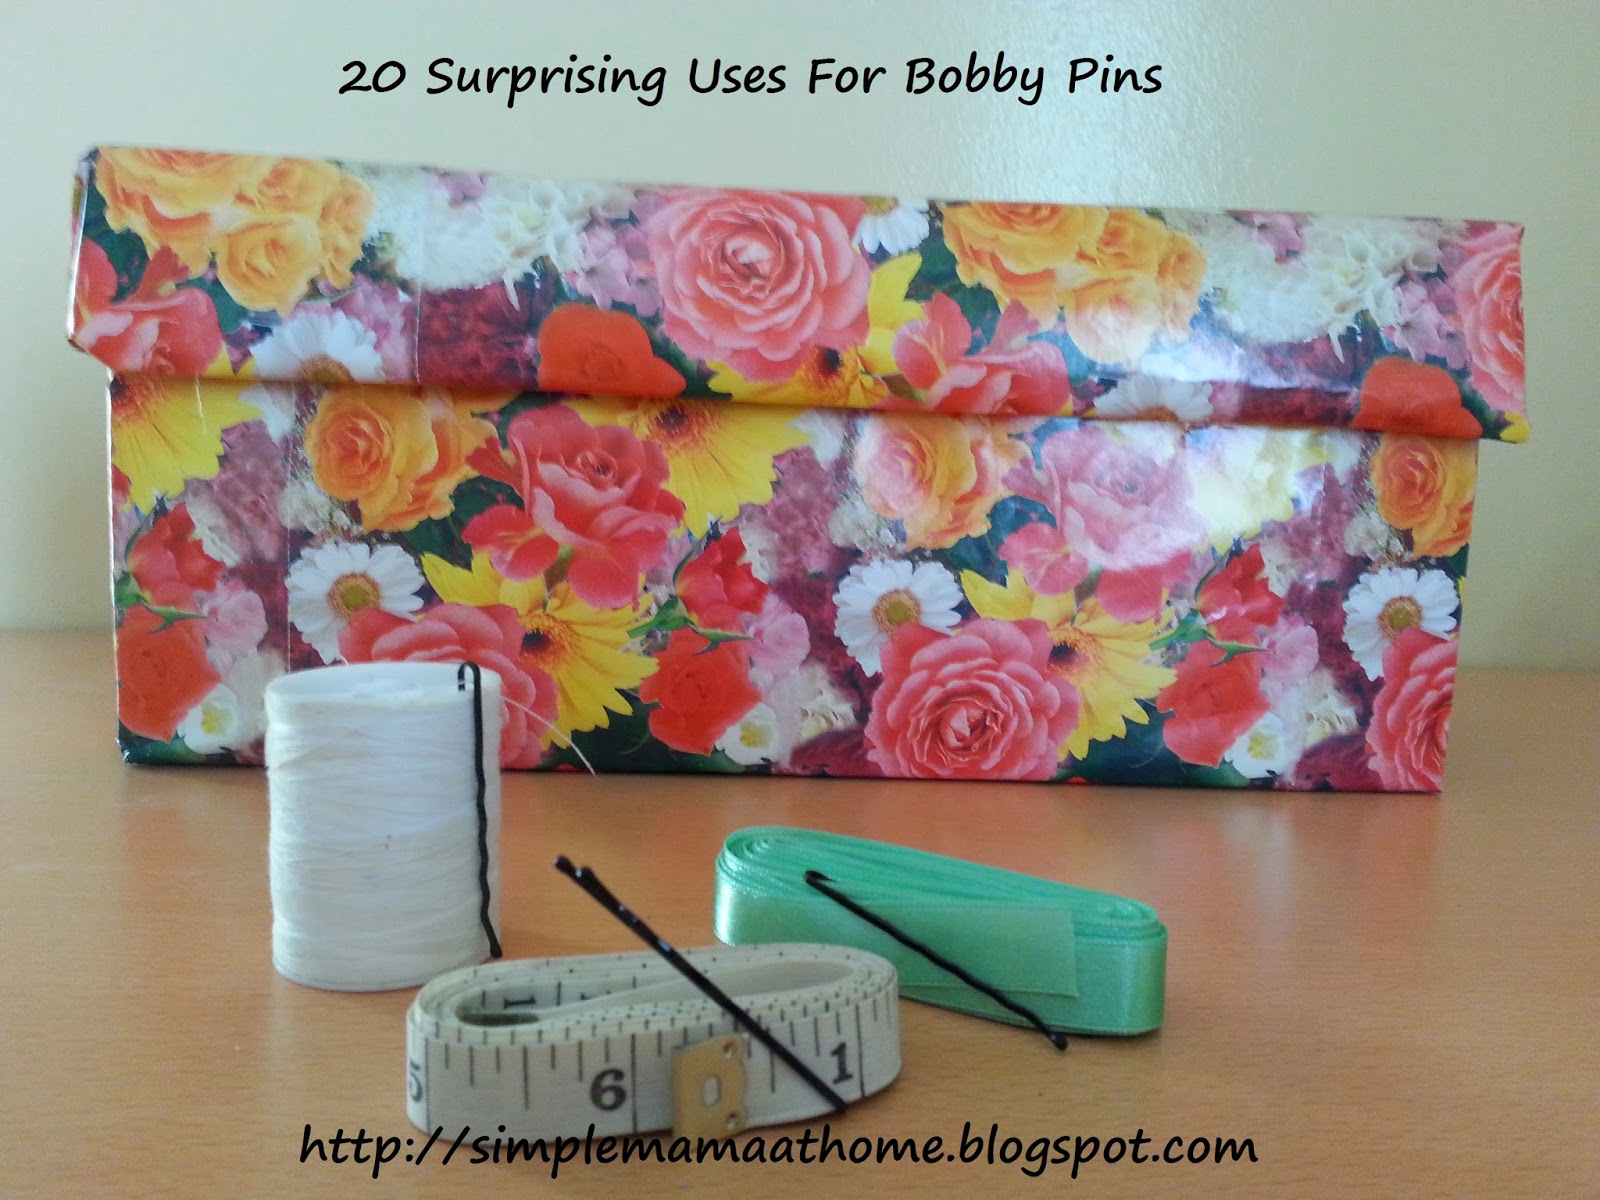 20 Surprising Uses For Bobby Pins